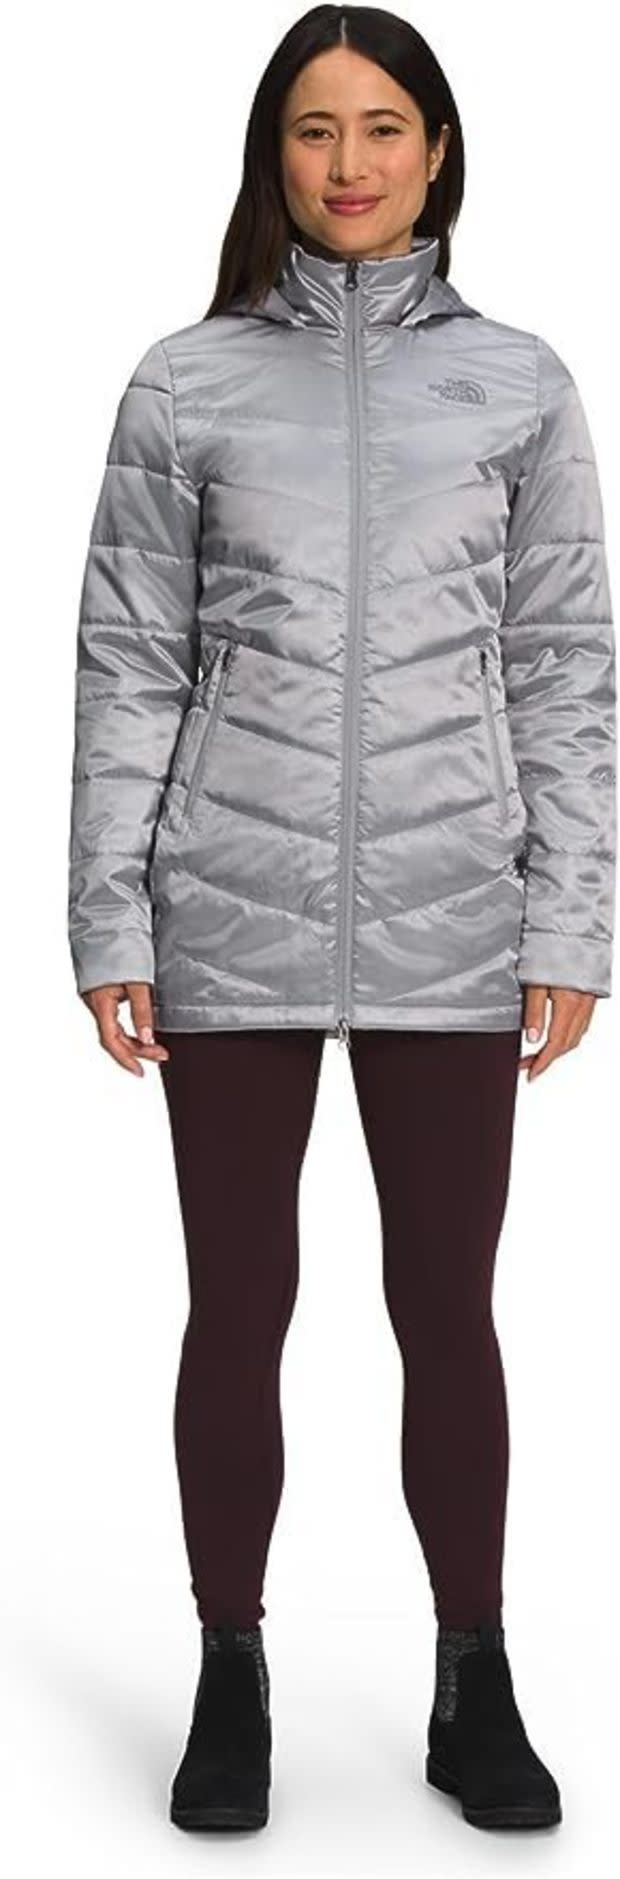 <p>Amazon</p><p>Few brands are as trusted for all-weather excursions than The North Face. This machine-washable, insulated, water-repellent pick is as easy to care for as it is to throw on for a chilly fall night with a questionable forecast. The brand says this coat is particularly compressible, making it a good option to pack for weekend getaway or even a longer trip with limited suitcase space.</p>